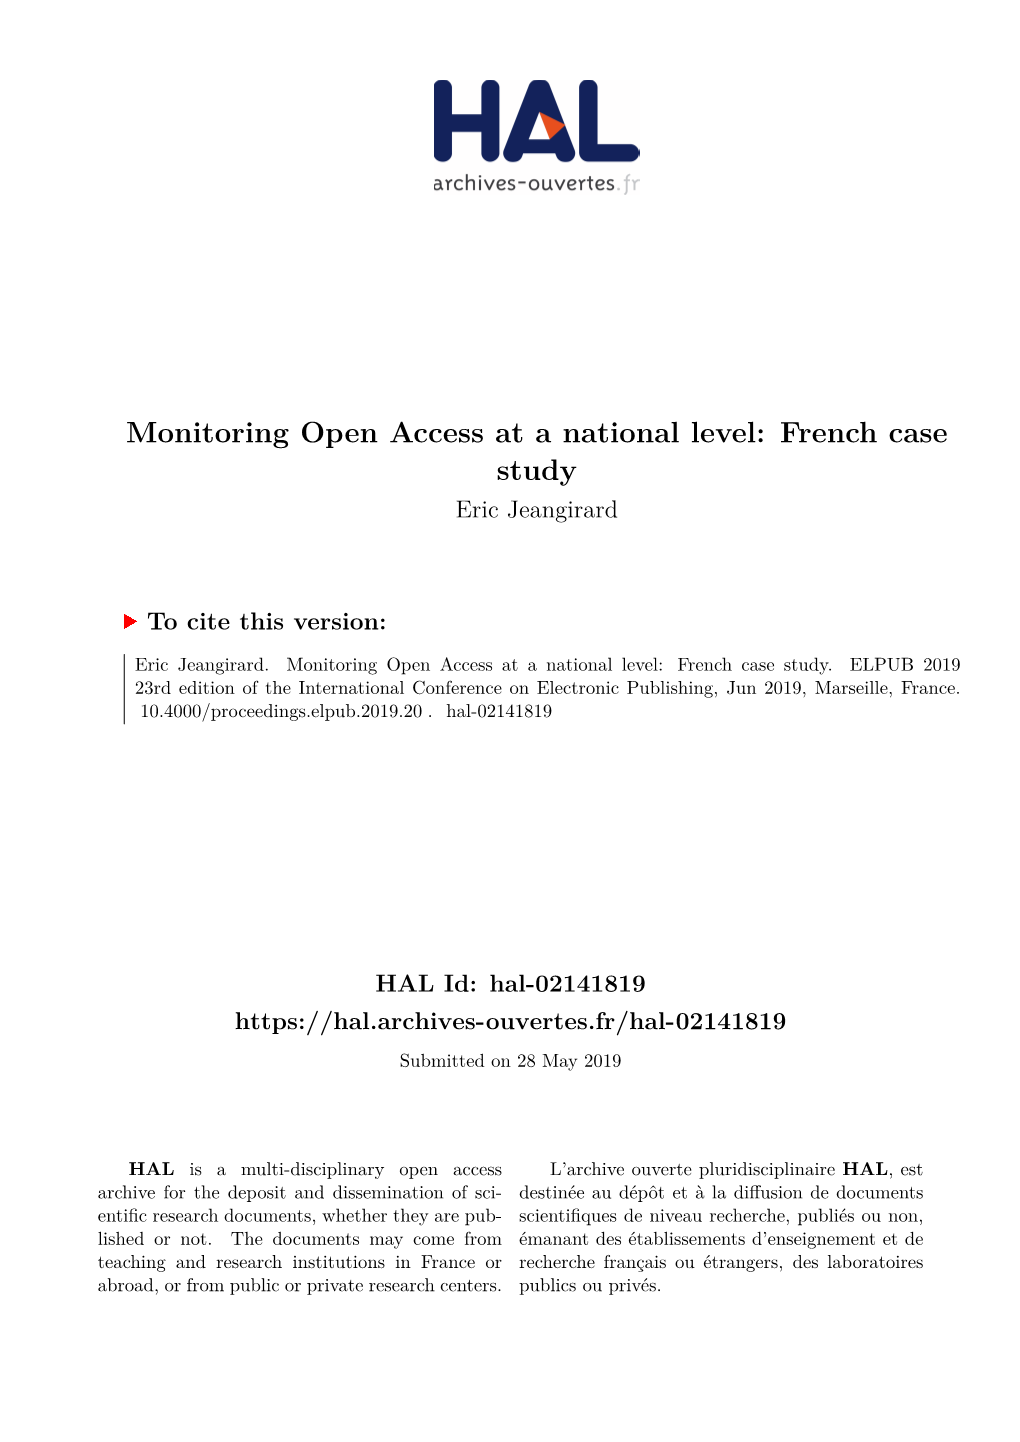 Monitoring Open Access at a National Level: French Case Study Eric Jeangirard